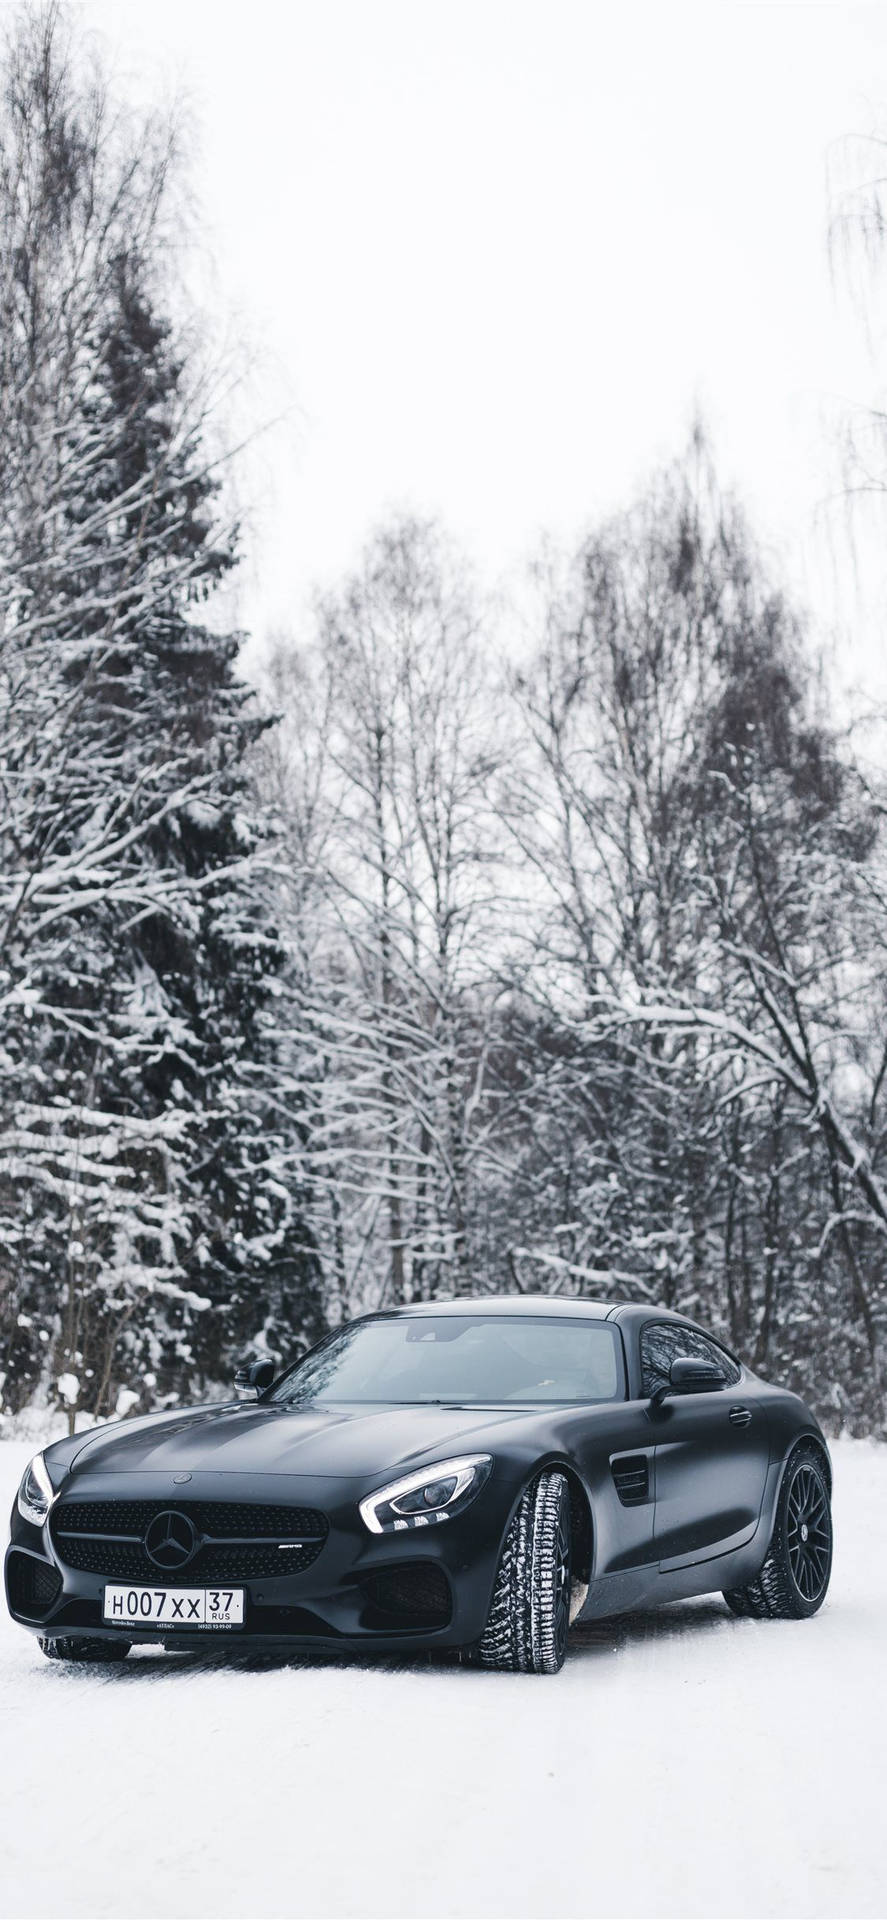 Ford Iphone In The Snow Wallpaper